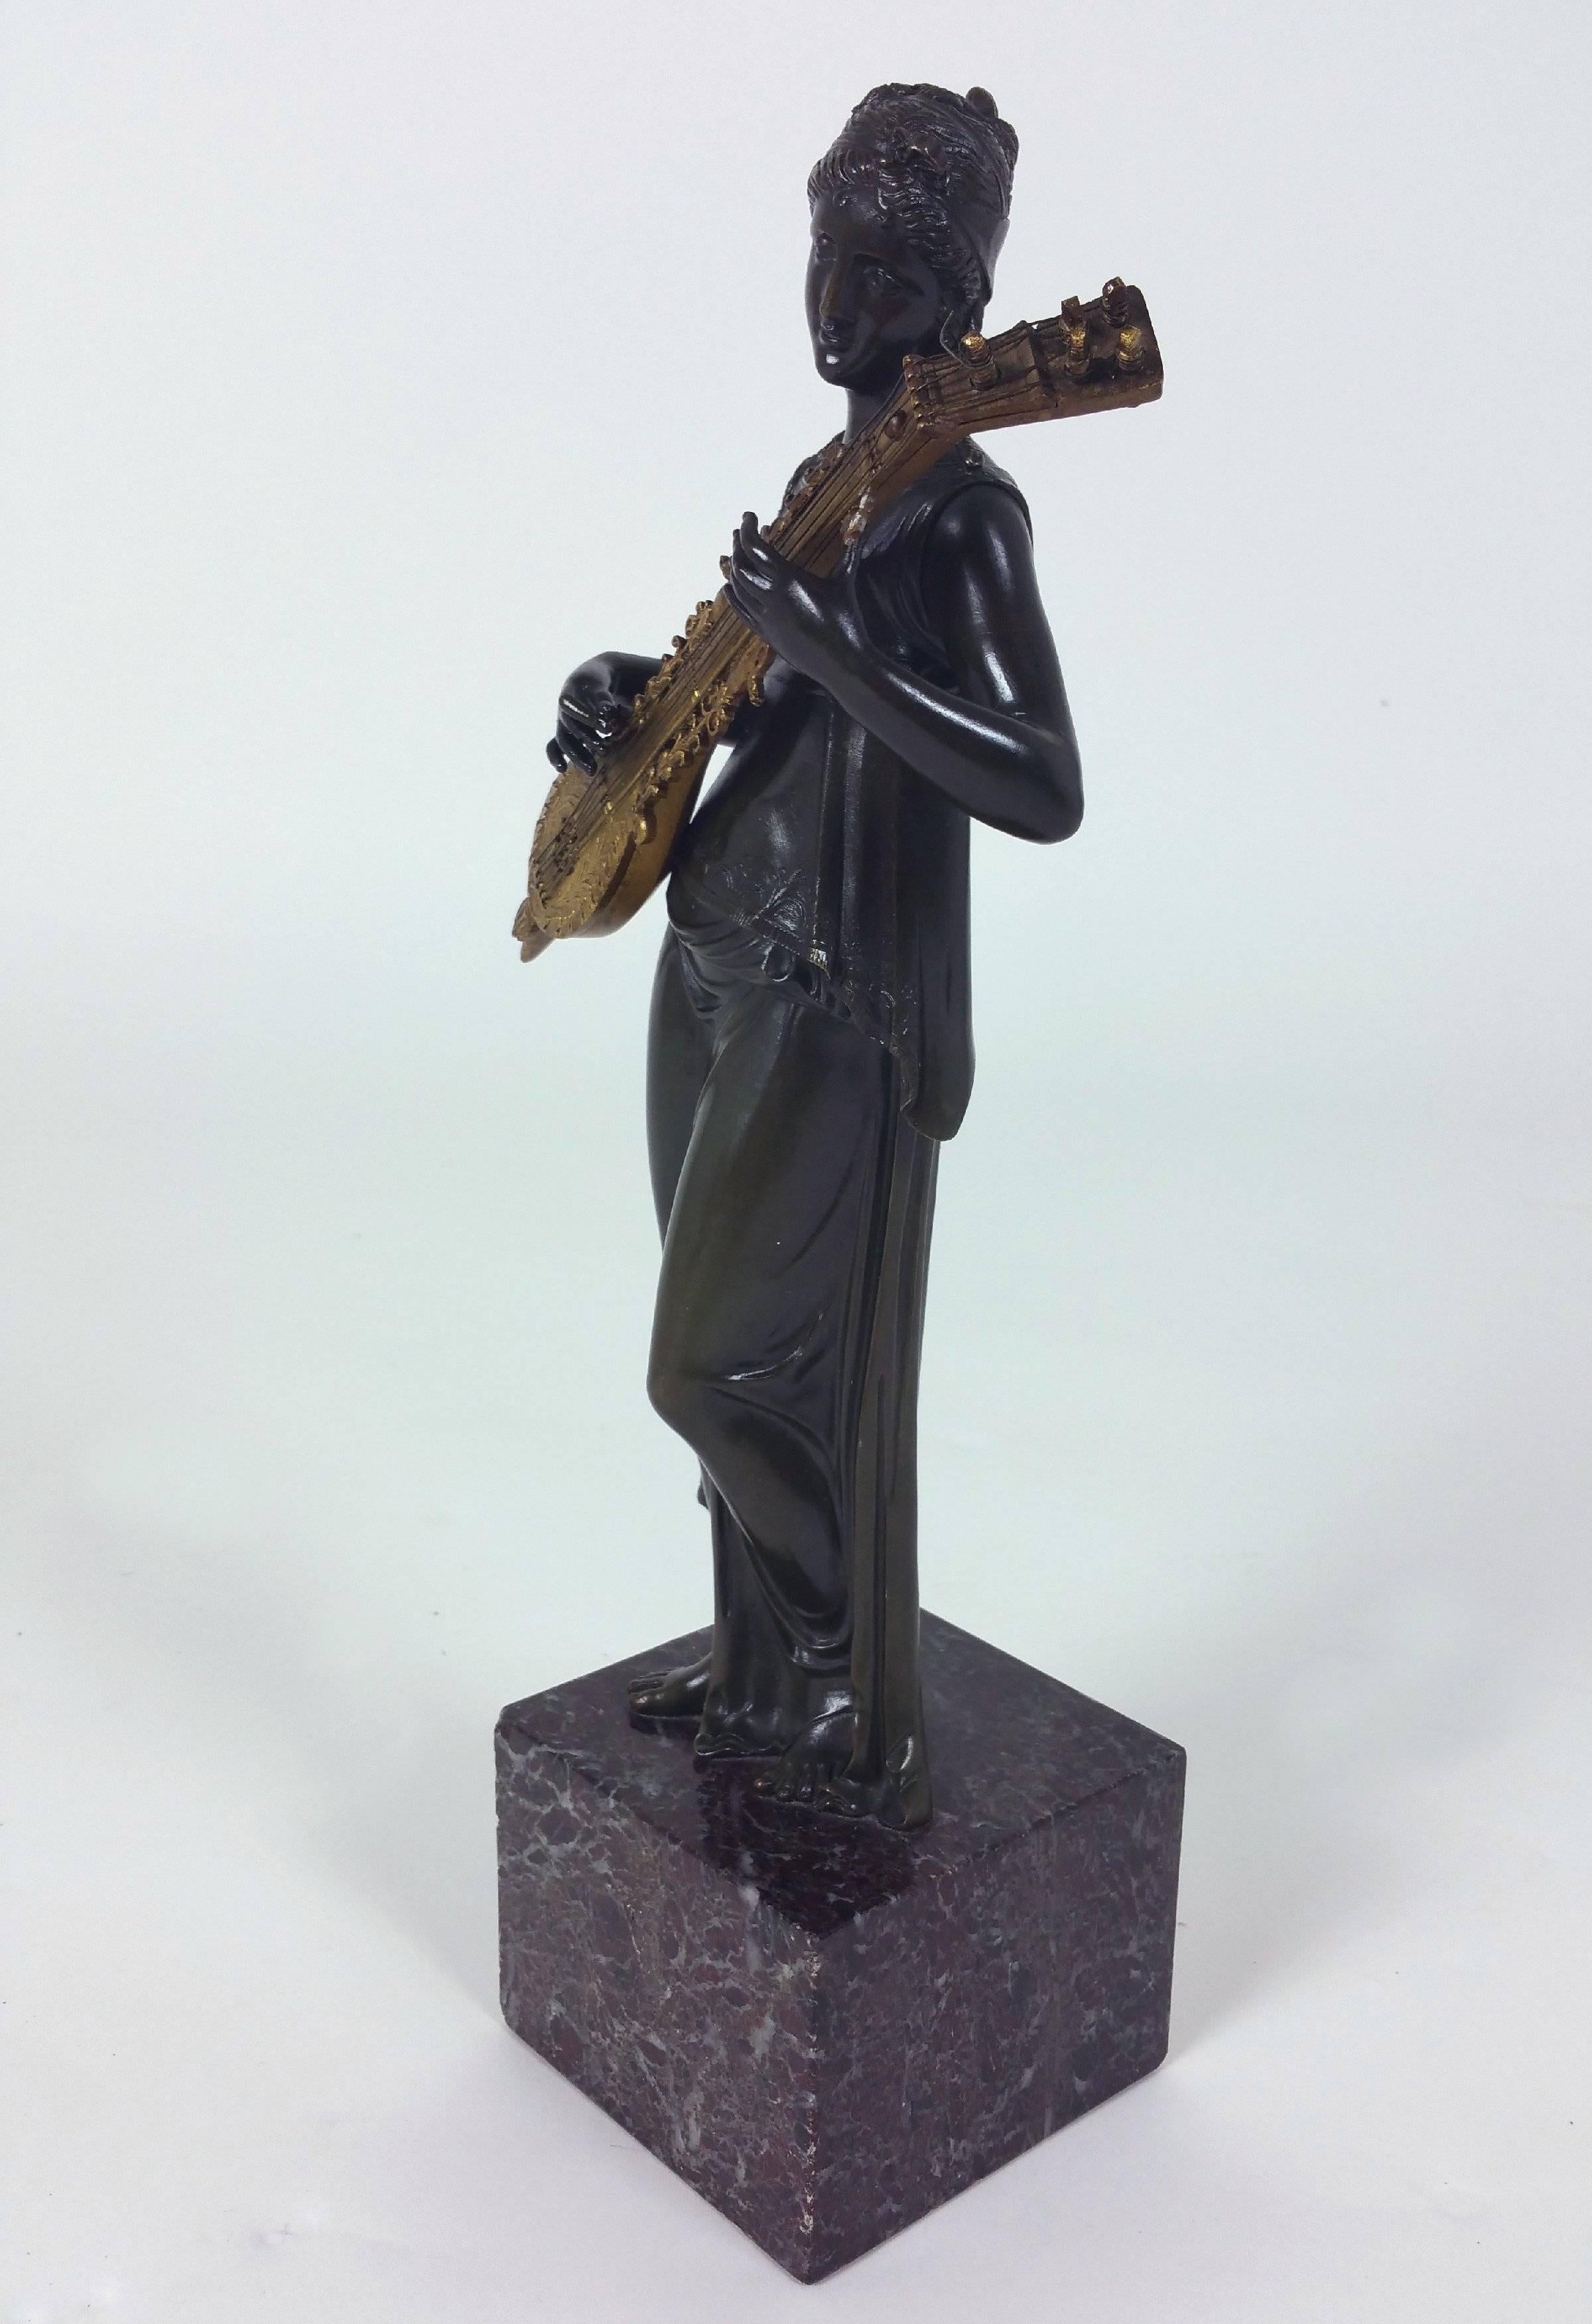 This enchanting 19th century Italian Grand Tour bronze and gilt bronze female sculpture depicts a classical maiden playing an elaborate stringed instrument. The figure is mounted on a square marble cube base and the stringed instrument is gilded. It